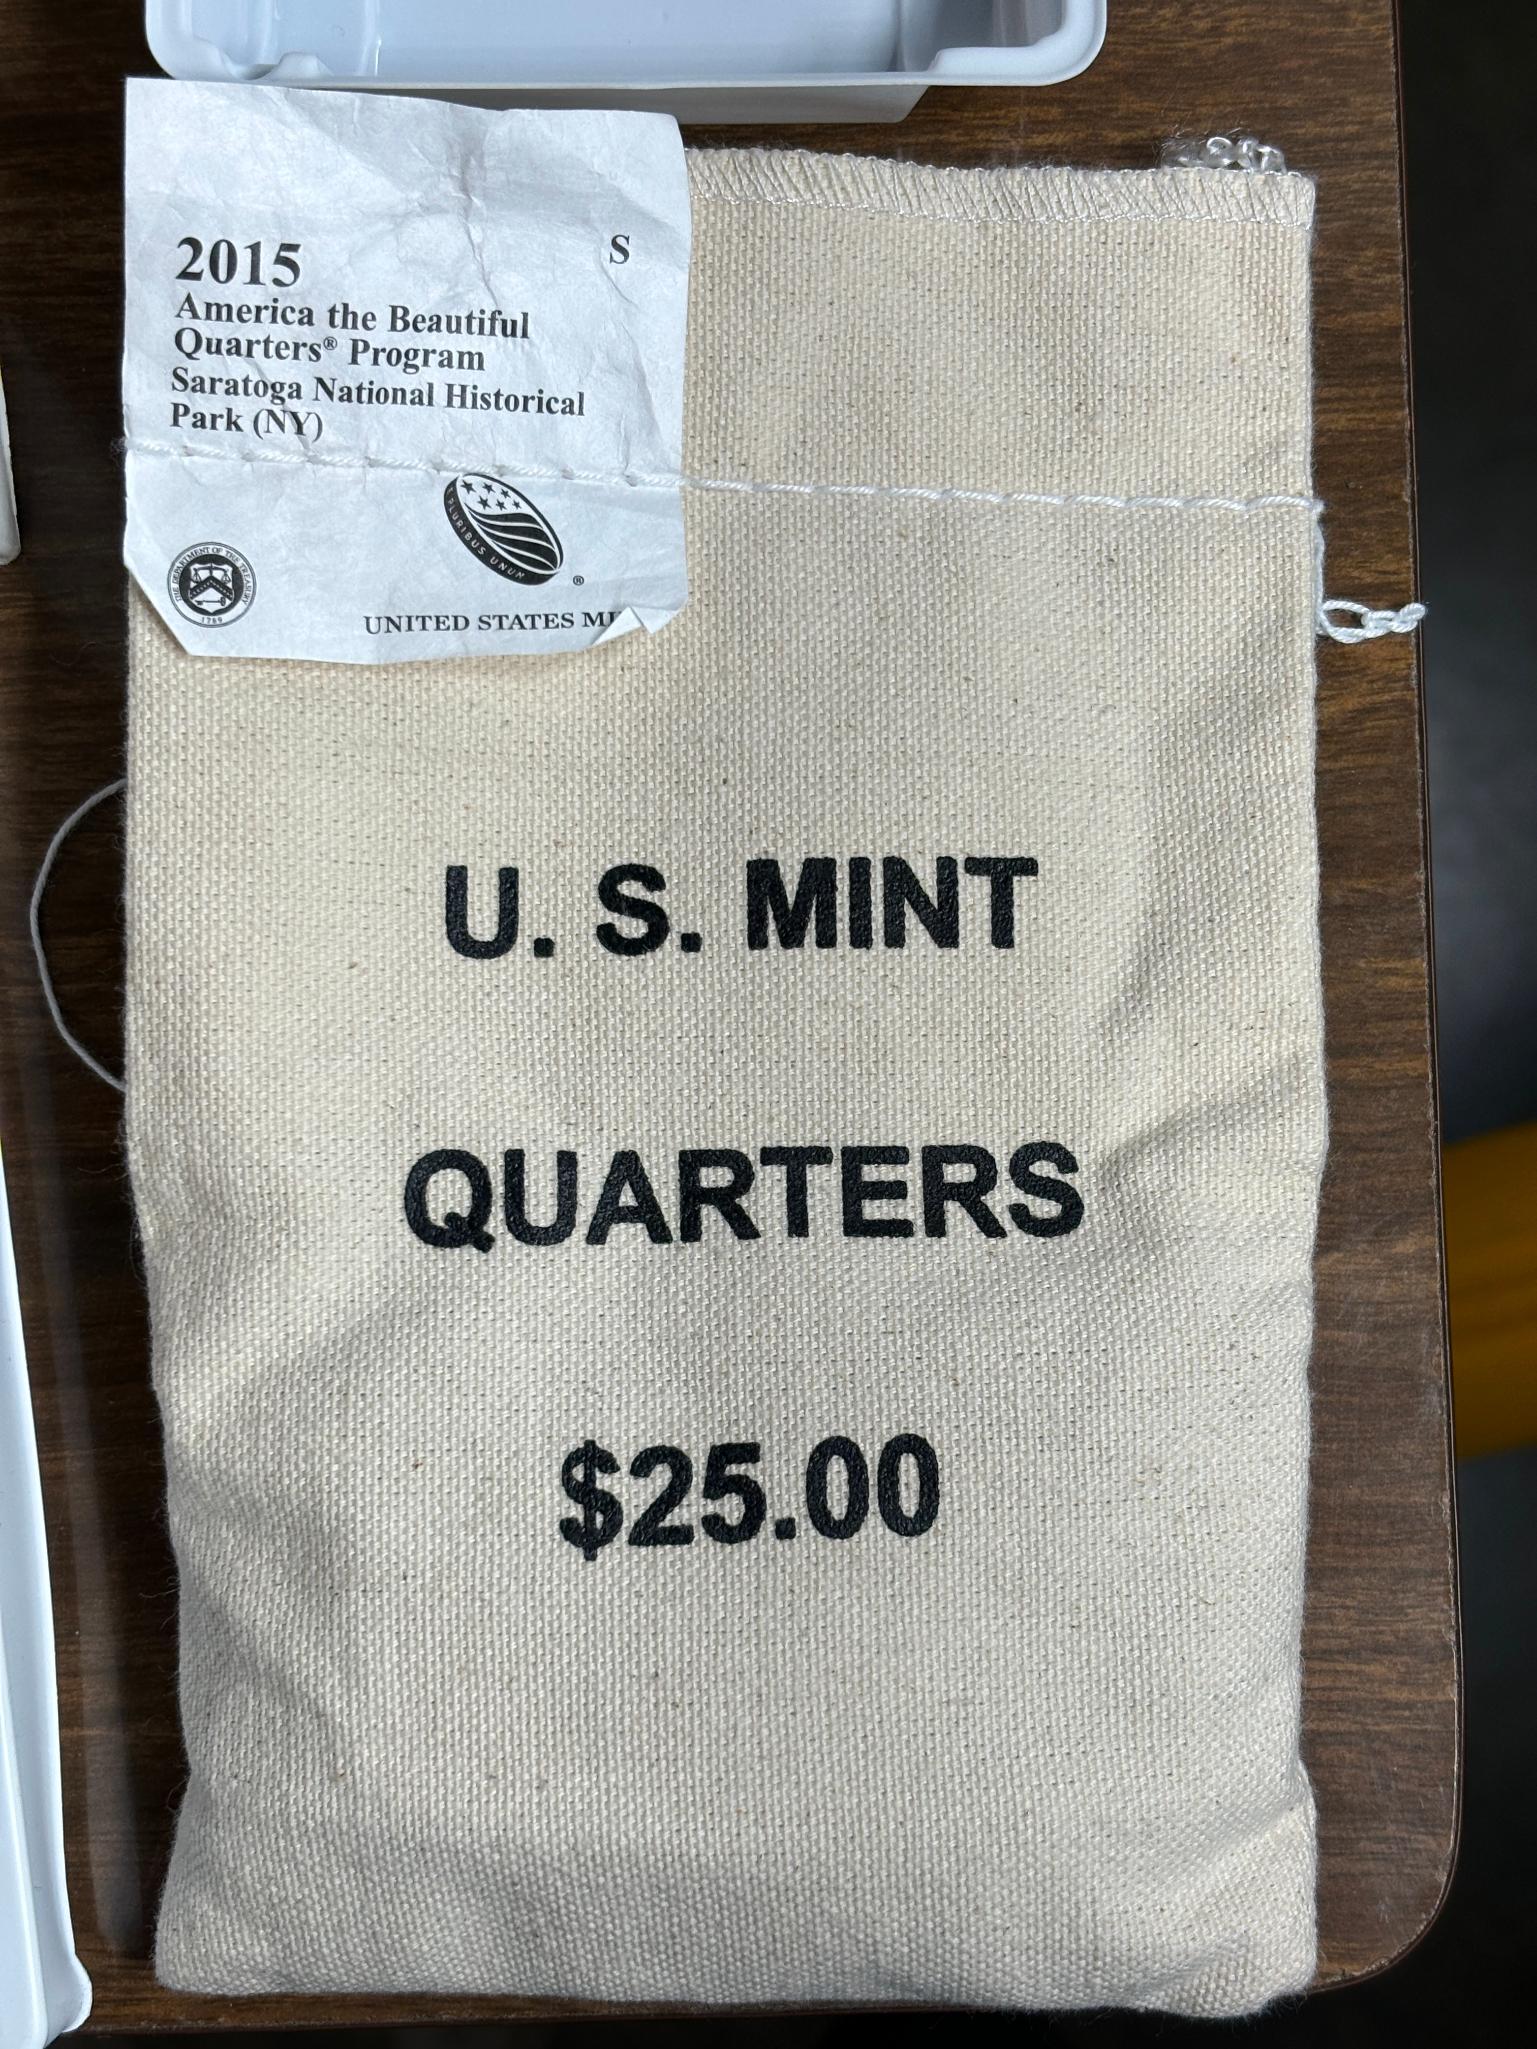 Huge Lot of Uncirculated Sealed Mint Coin Rolls $484 Face Value $1, 1/2 Dollar, Quarters, Nickels